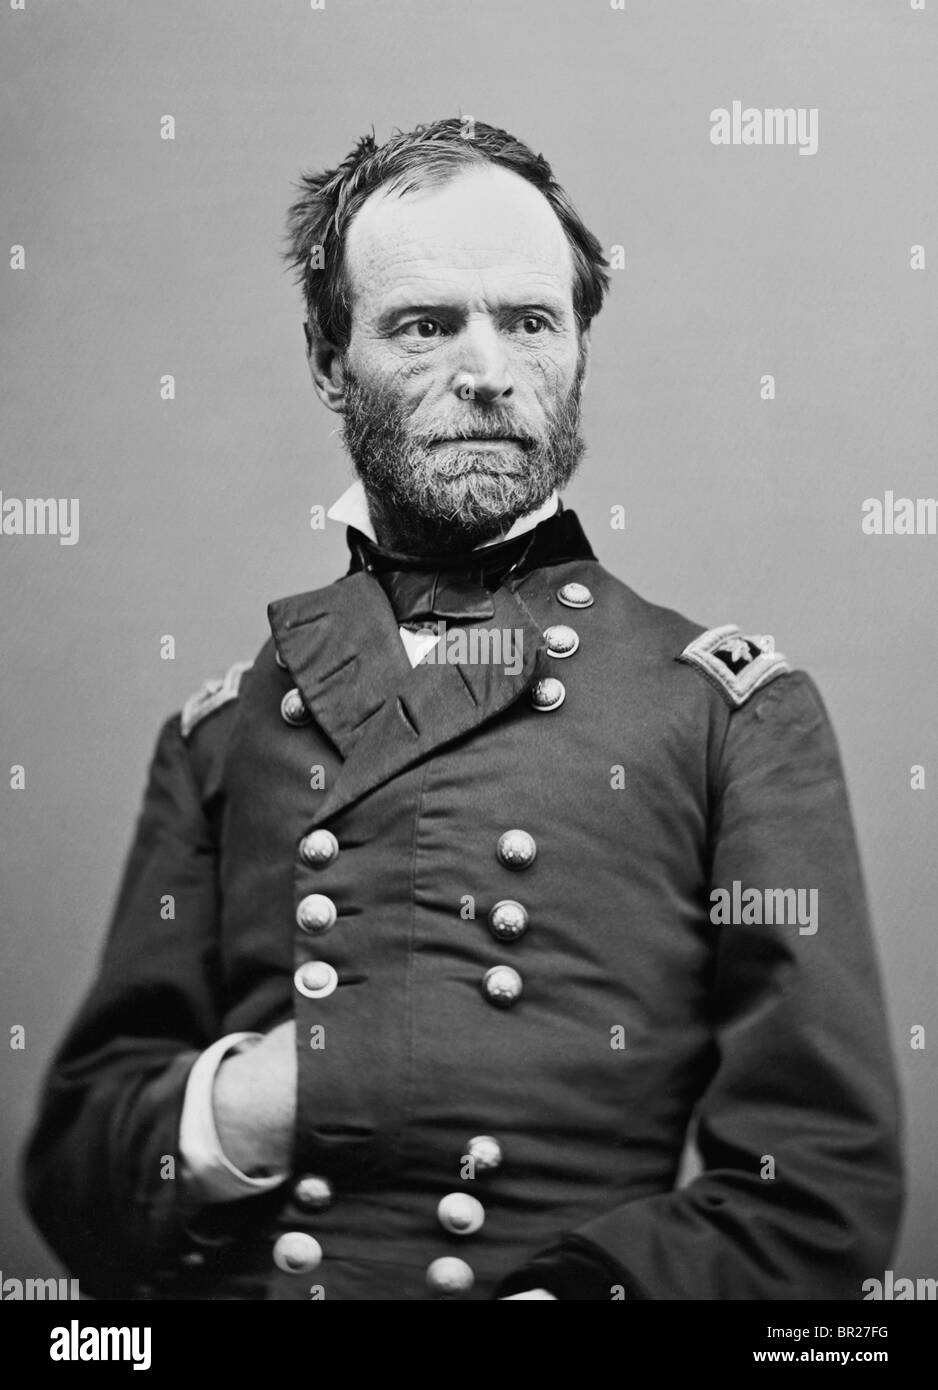 William Tecumseh Sherman (1820 - 1891) - Union Army General in American Civil War + Commanding General of US Army 1869 - 1883. Stock Photo